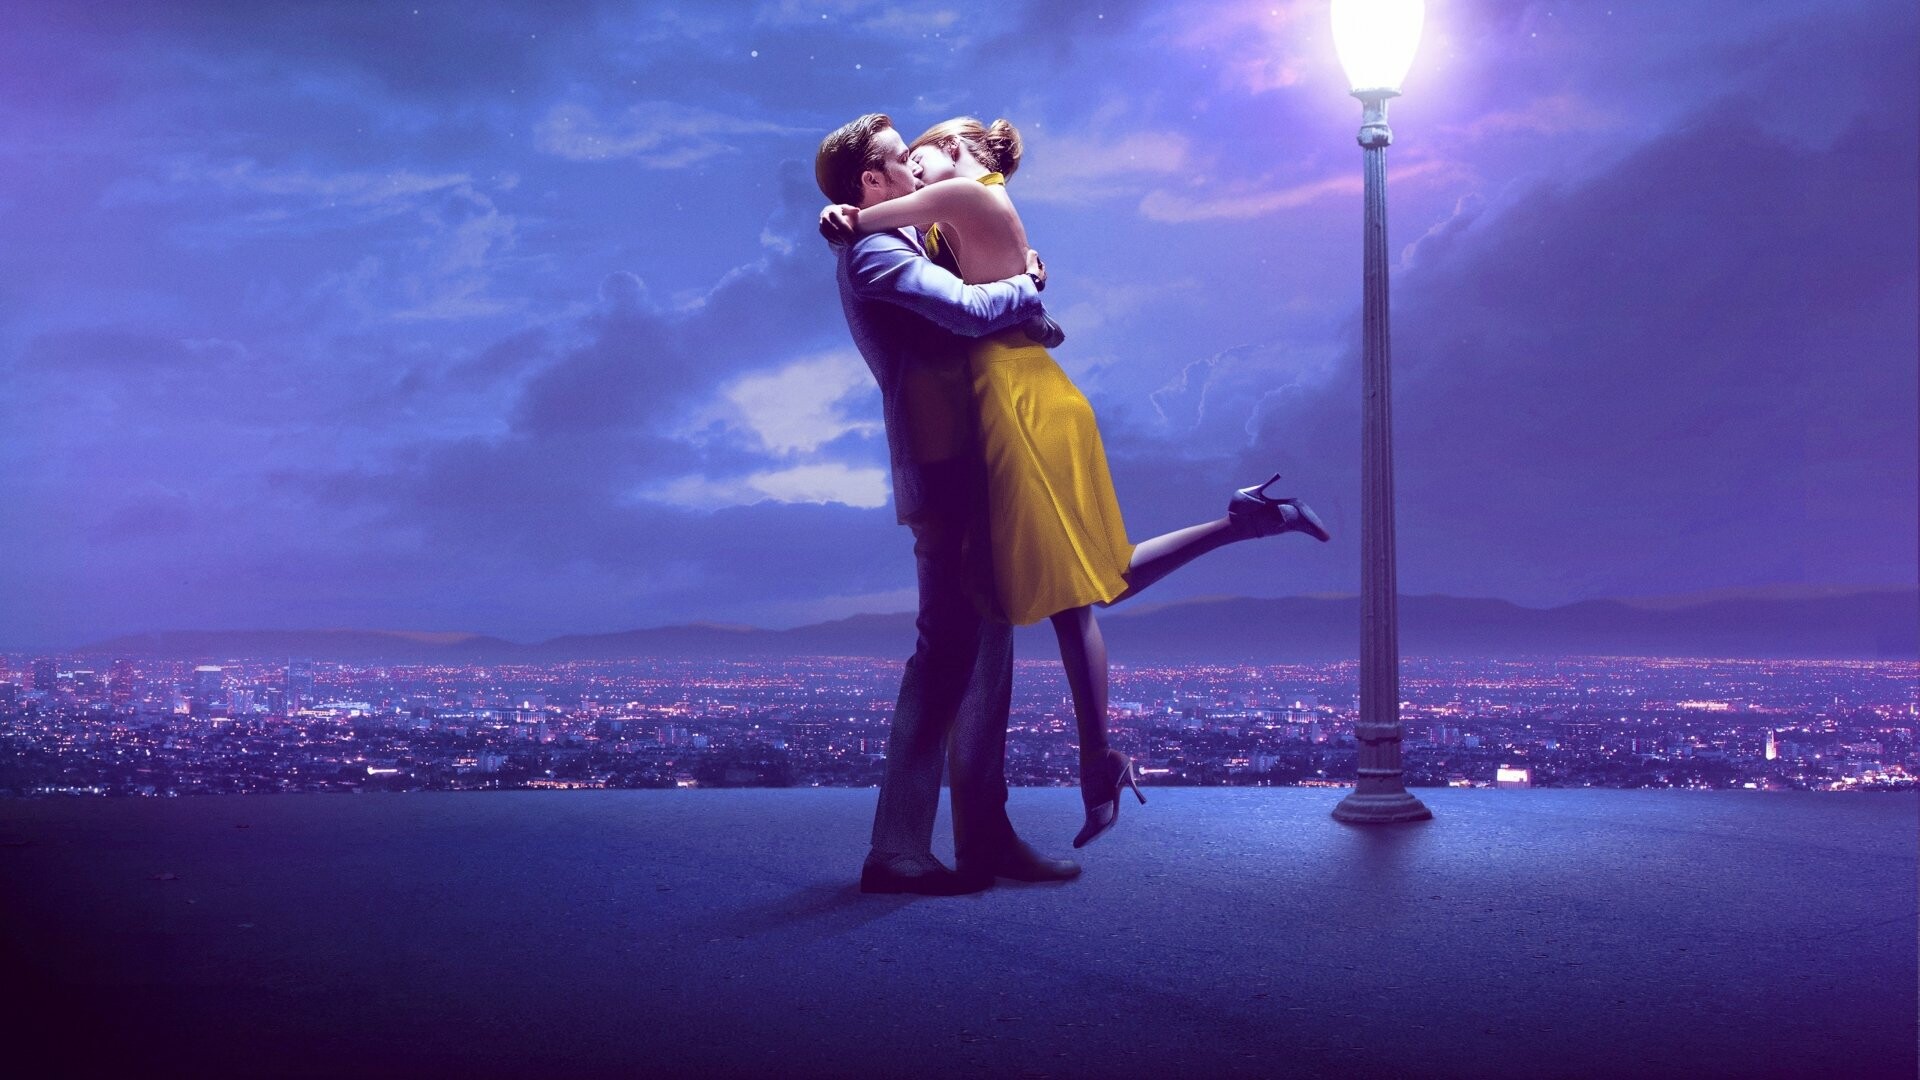 La La Land: A beautiful, moving romantic musical set in modern-day Los Angeles, with the feel of old-time Hollywood. 1920x1080 Full HD Wallpaper.